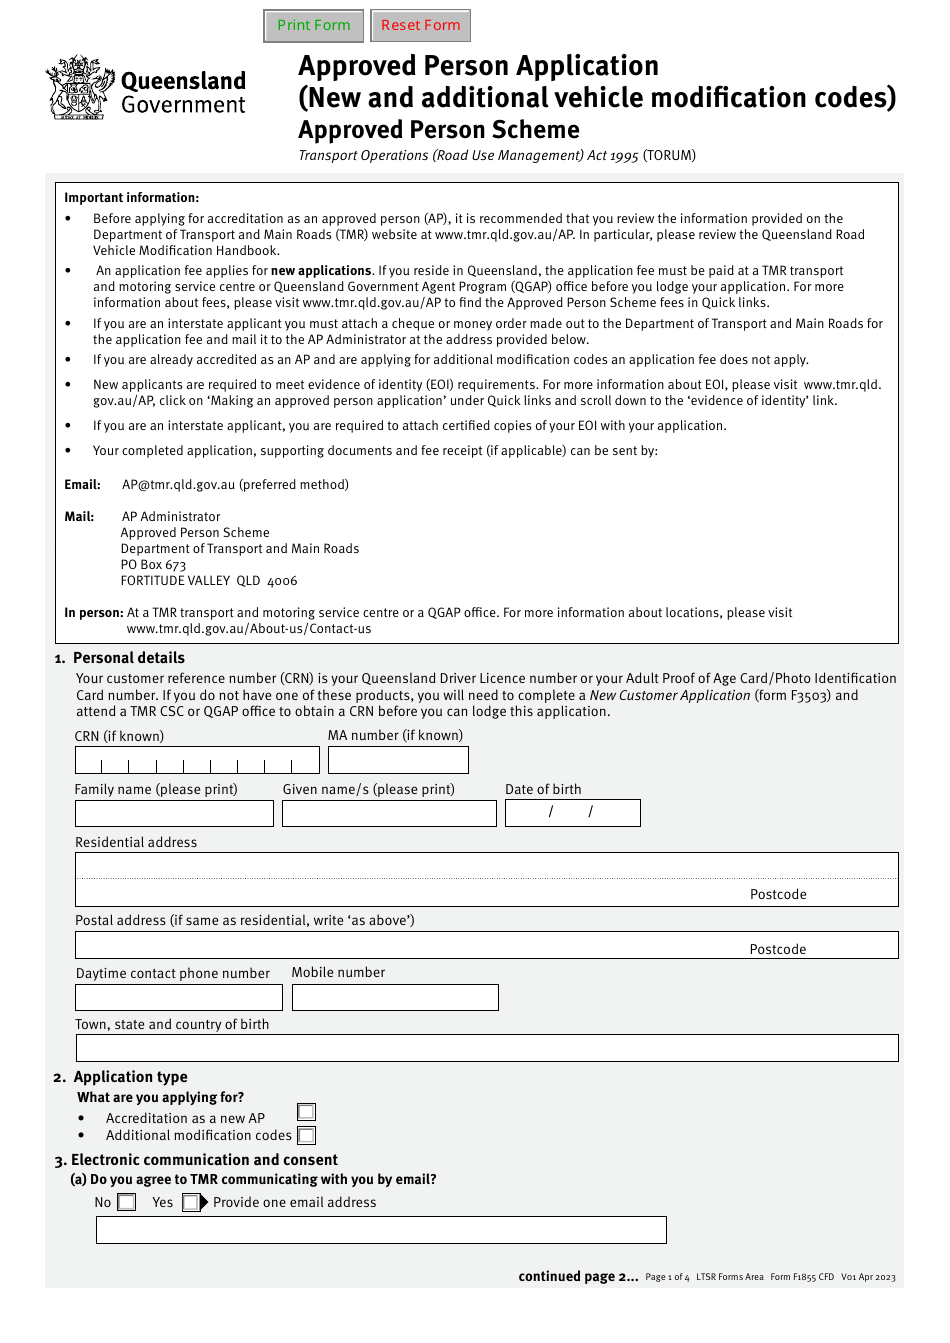 Form F1855 Approved Person Application (New and Additional Vehicle Modification Codes) - Approved Person Scheme - Queensland, Australia, Page 1